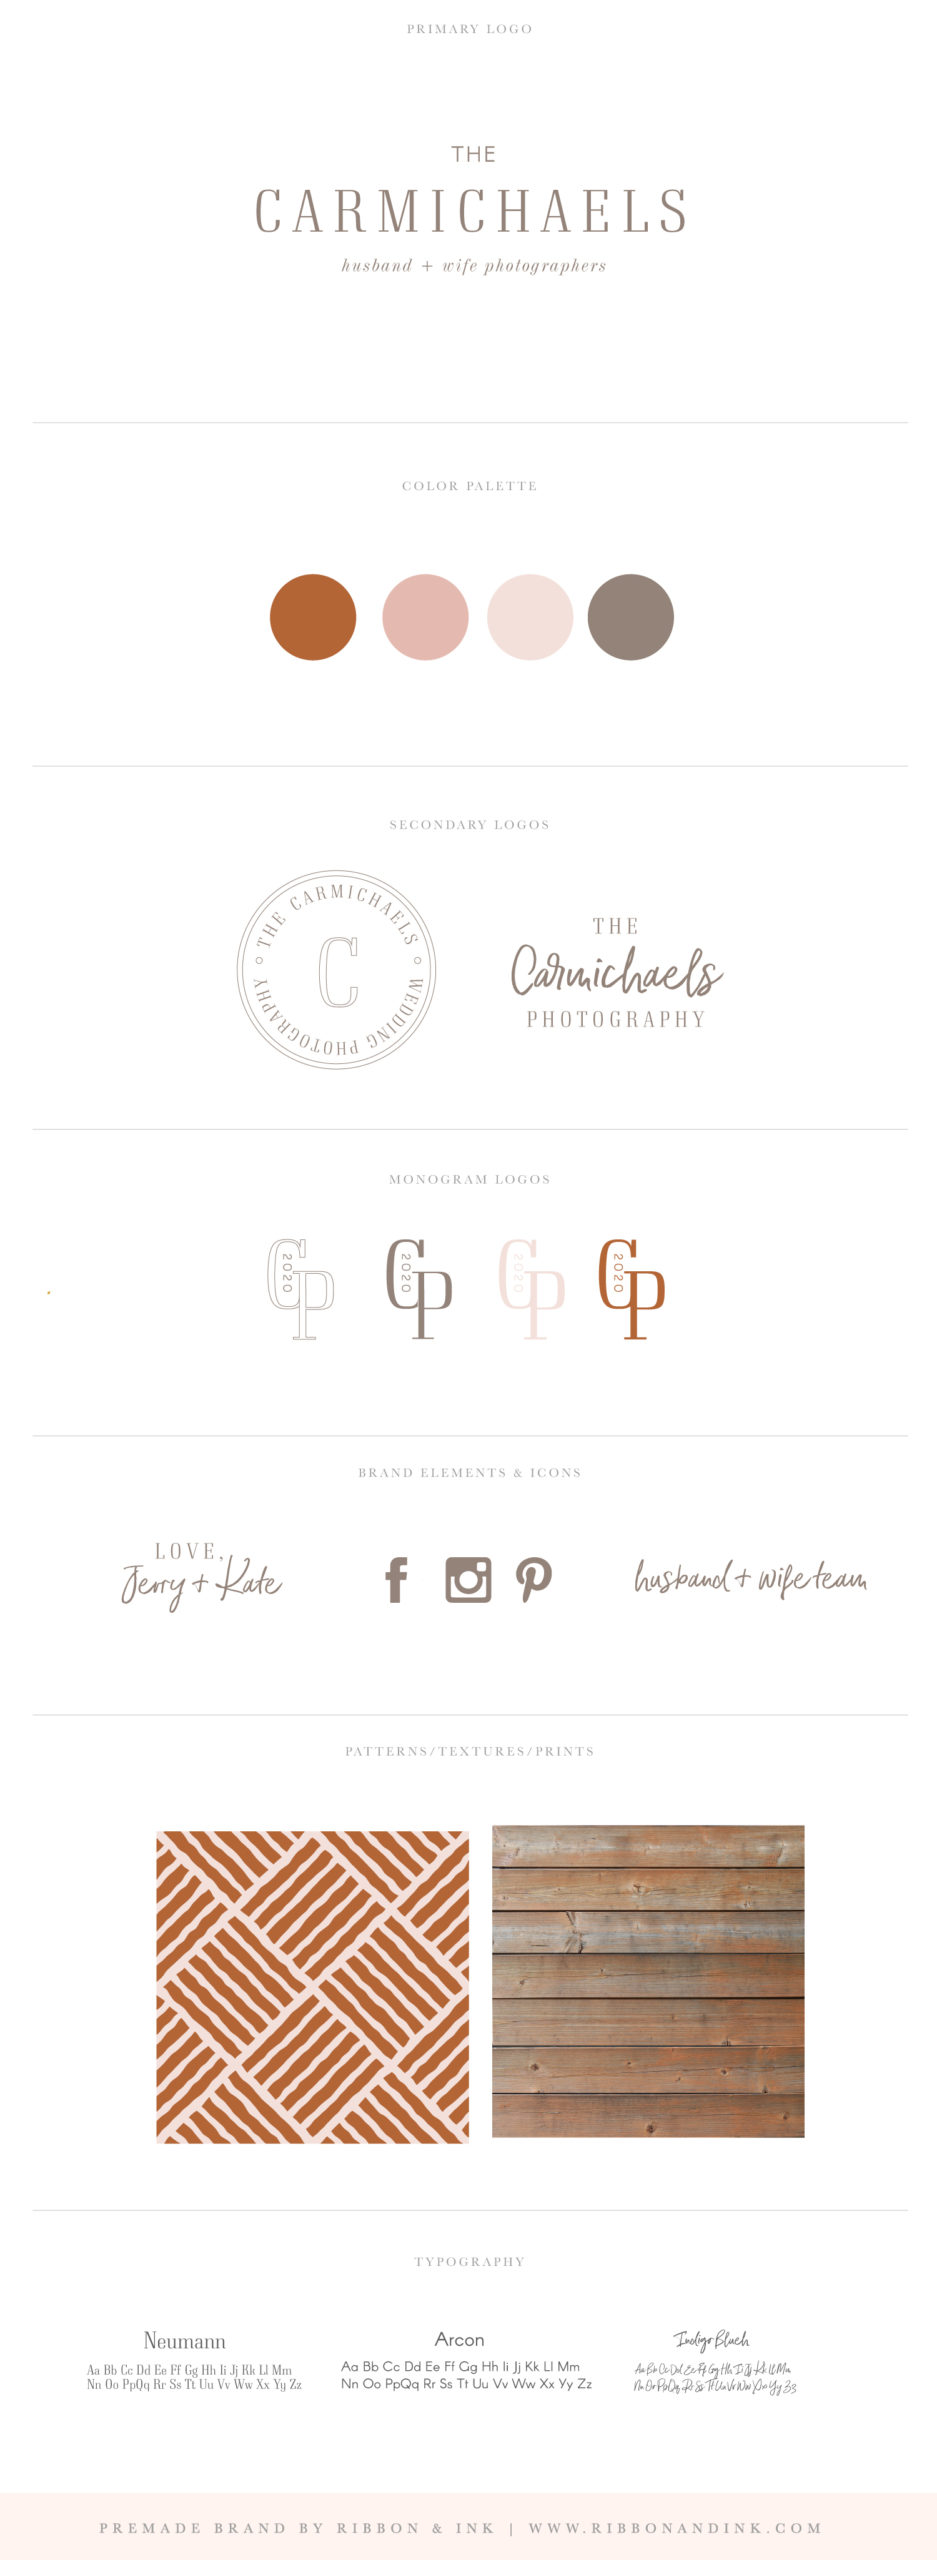 brand identity board / husband and wife photographers / husband and wife team / premade branding / brand kit / premade logo / branding for small businesses / branding board